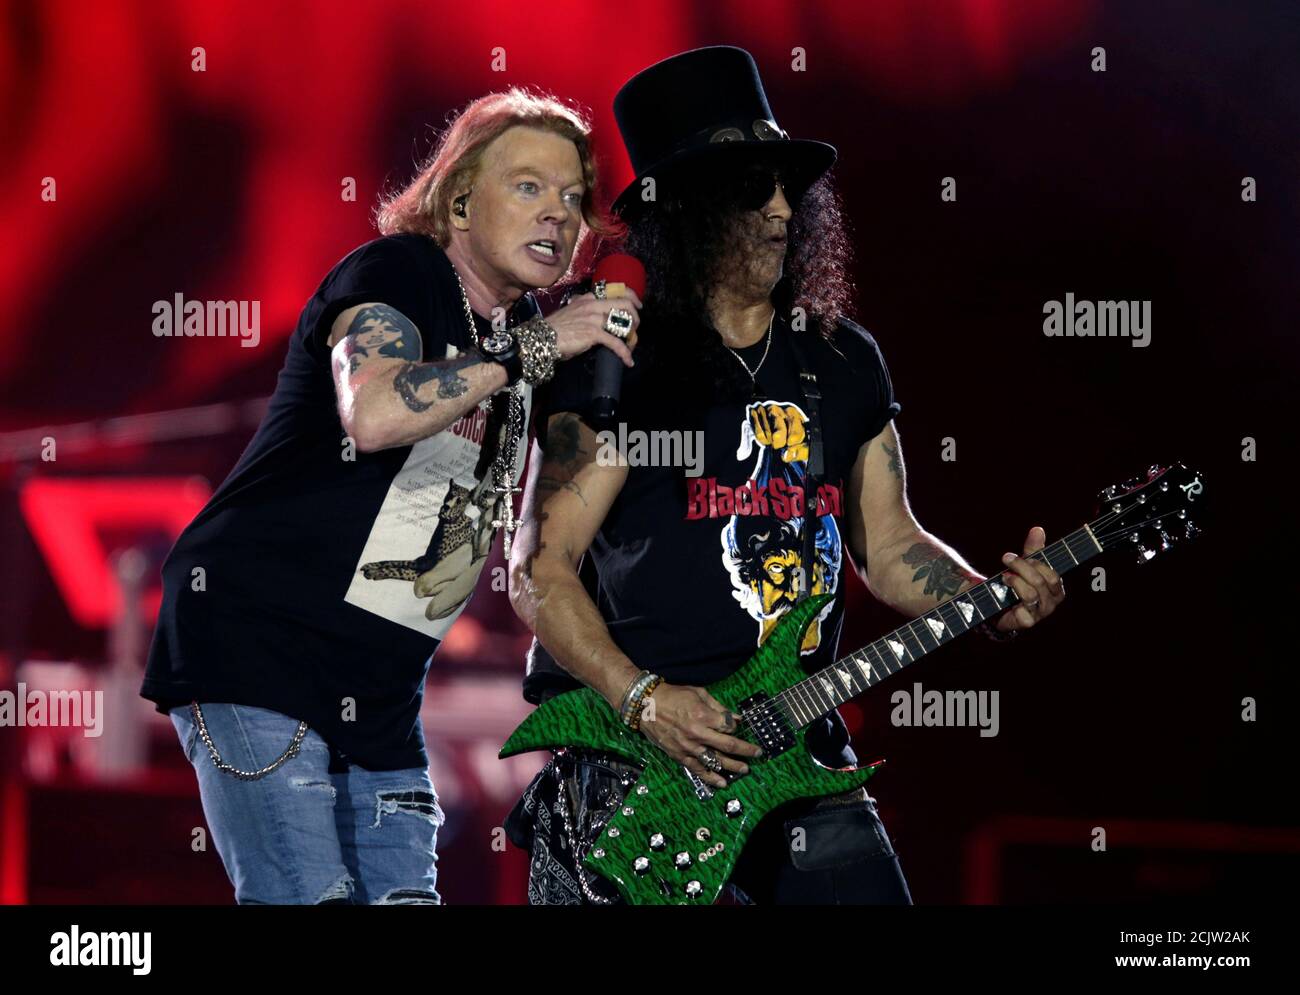 Axl Rose and Slash, lead singer and lead guitarist of U.S. rock band Guns N'  Roses, perform during their "Not in This Lifetime... Tour" at the du Arena  in Abu Dhabi, United